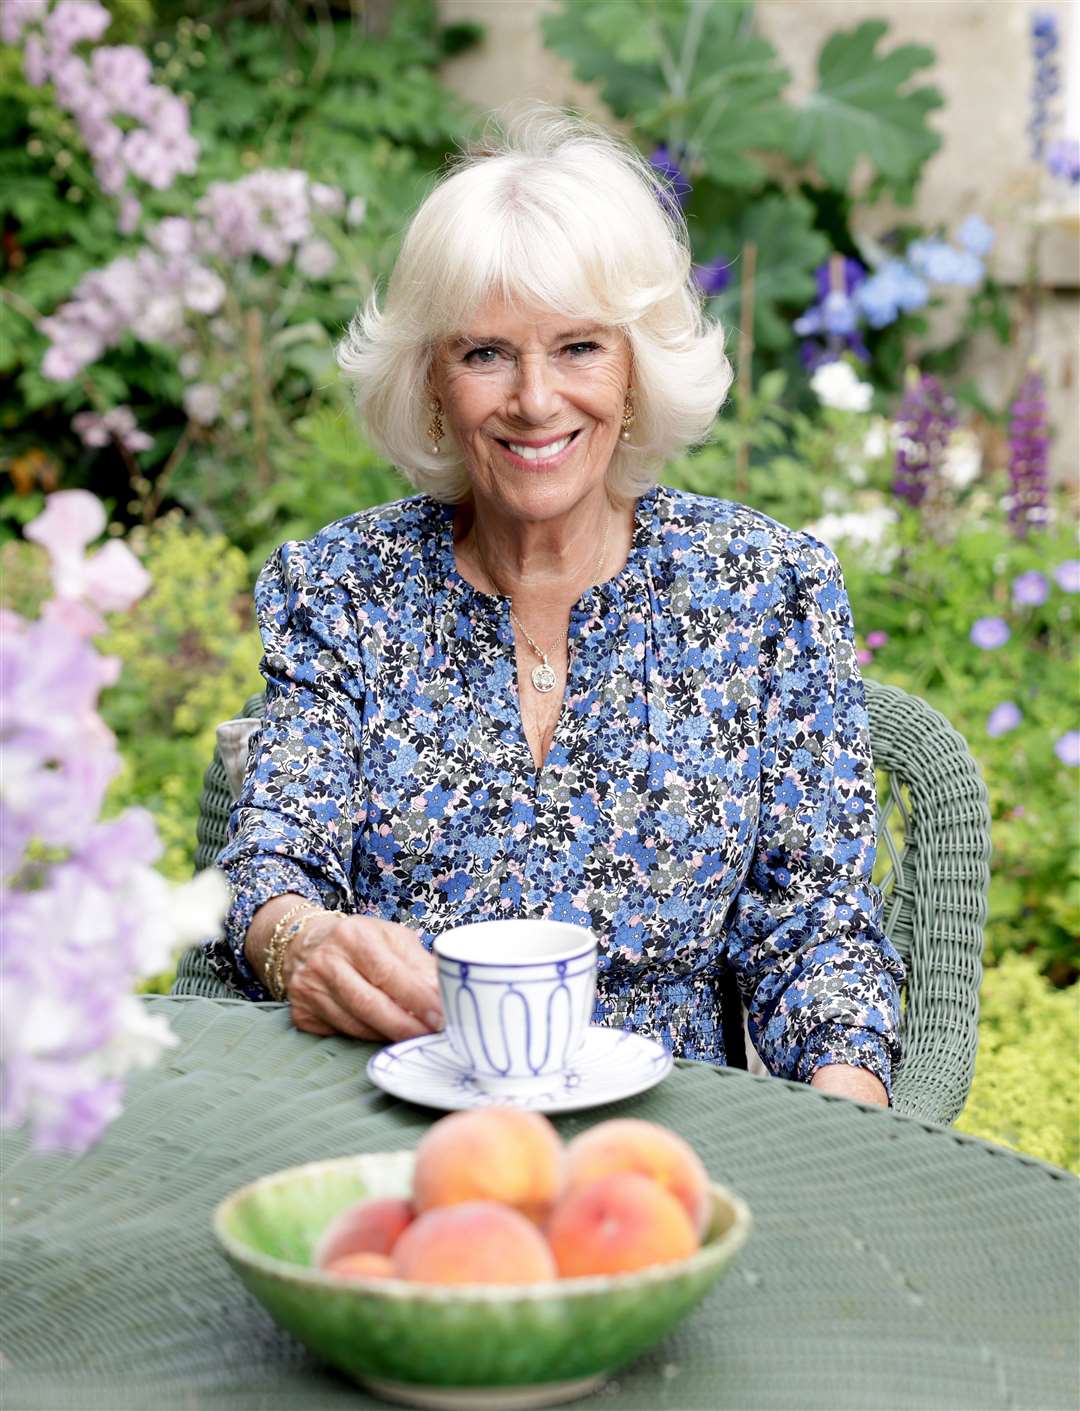 The Duchess of Cornwall posing for an official portrait to mark her 75th birthday (Chris Jackson/Clarence House)